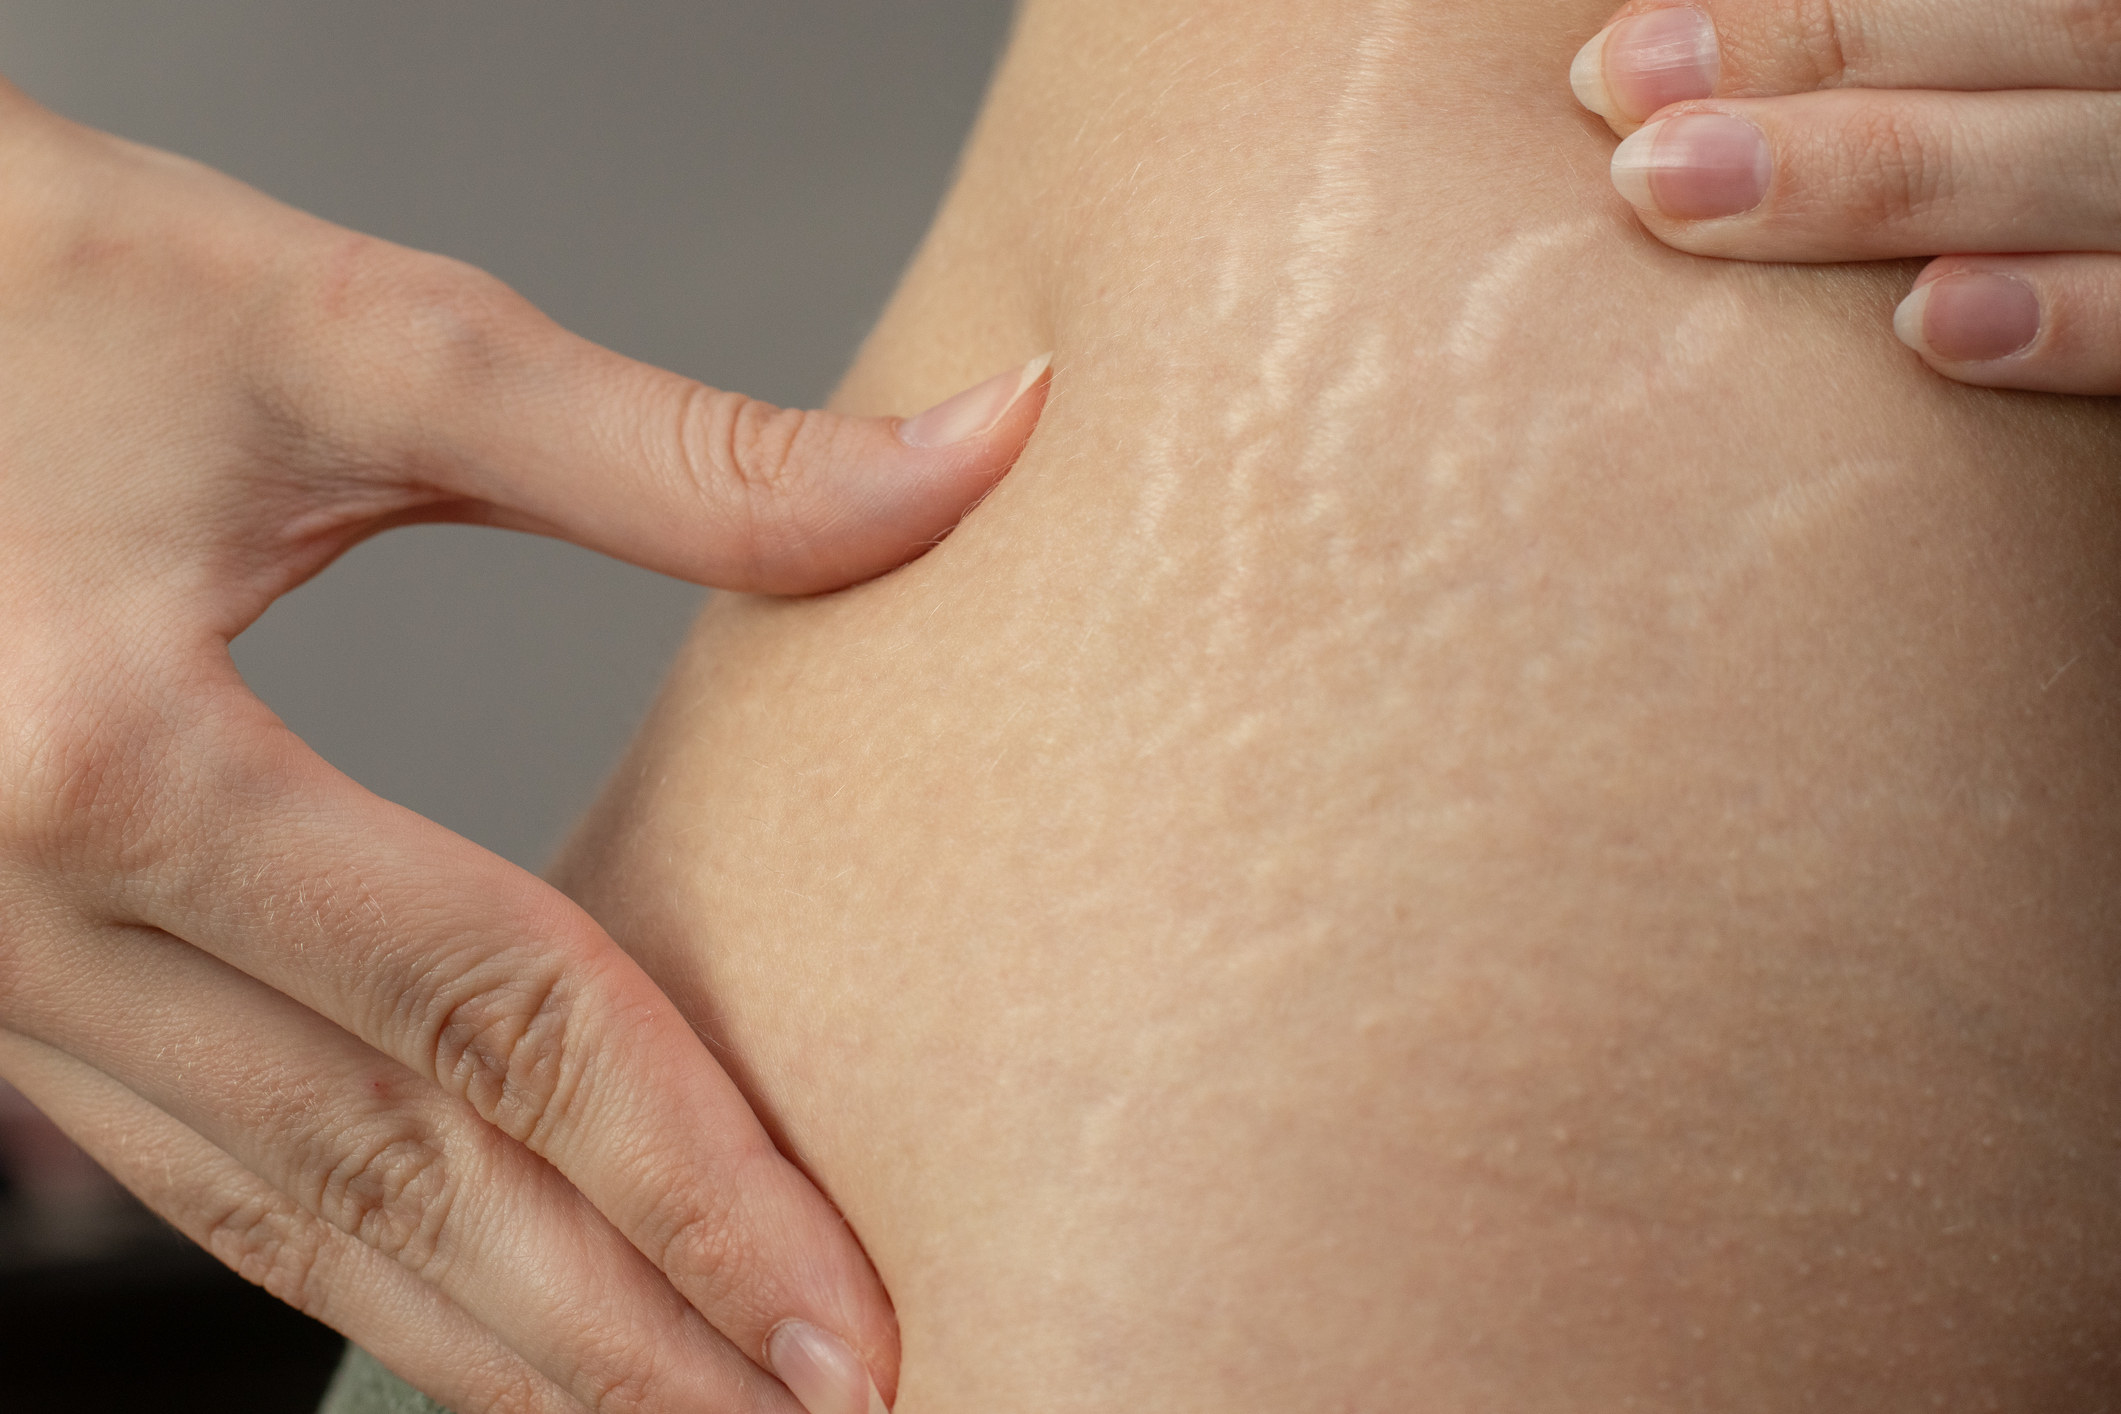 A woman reveals stretch marks on her skin